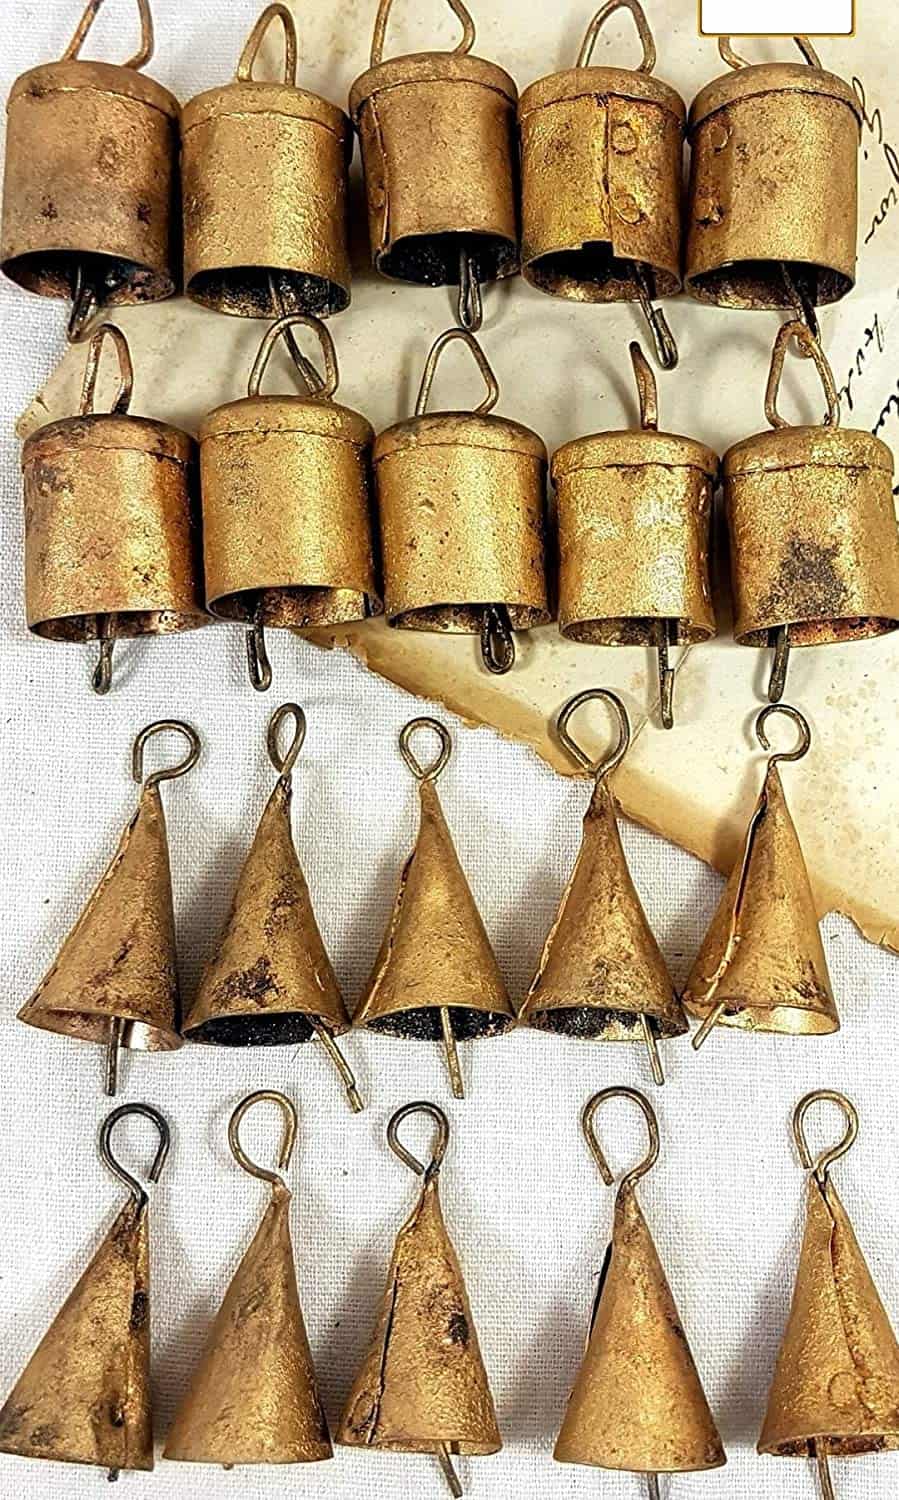 Where To Buy Antique Brass Bells For Decor - My Creative Days